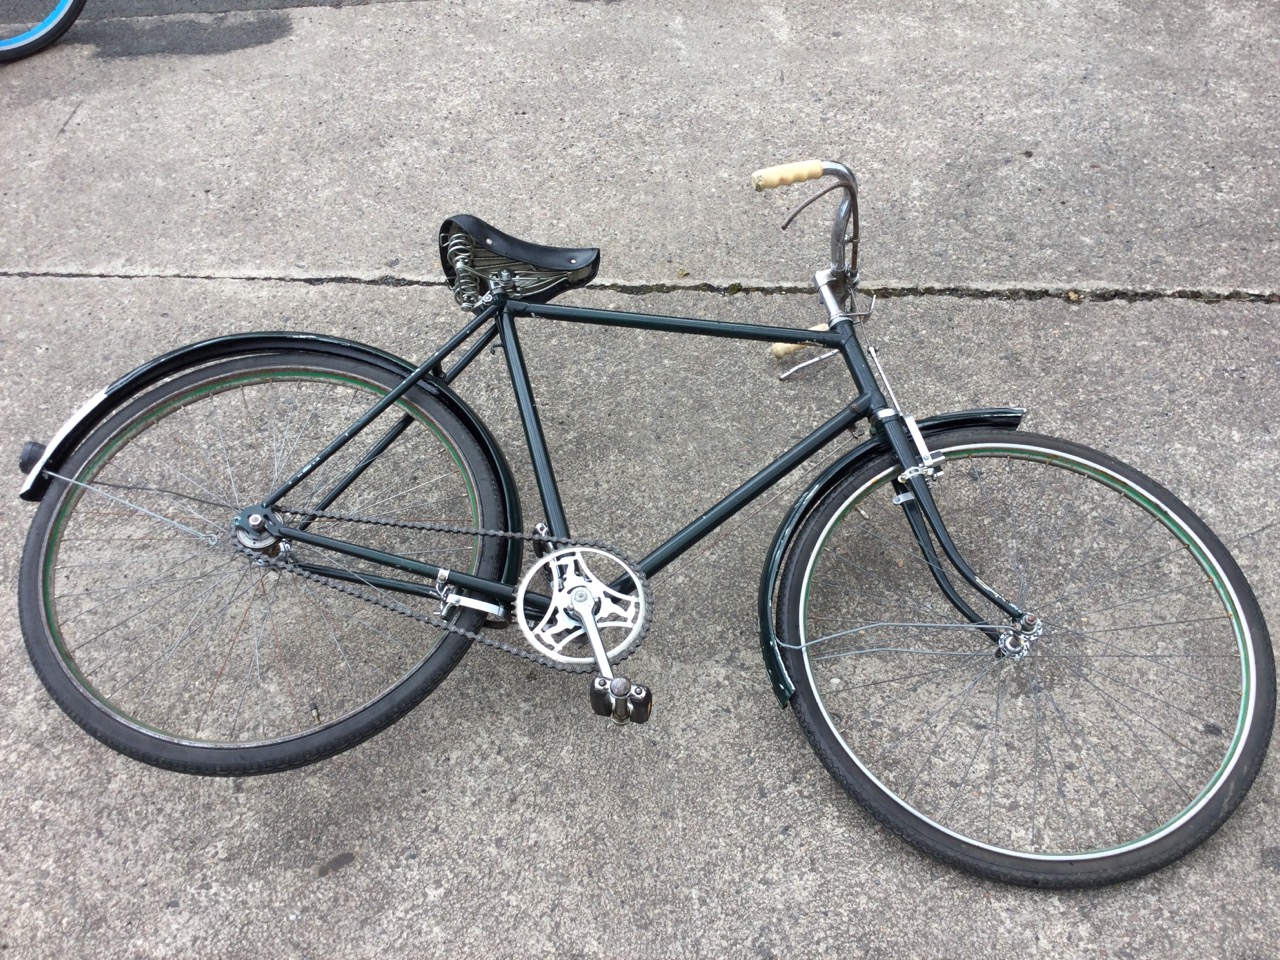 A Brooks old fashioned bicycle with sprung seat and lever brakes, moulded mudguards, etc. - Image 2 of 3